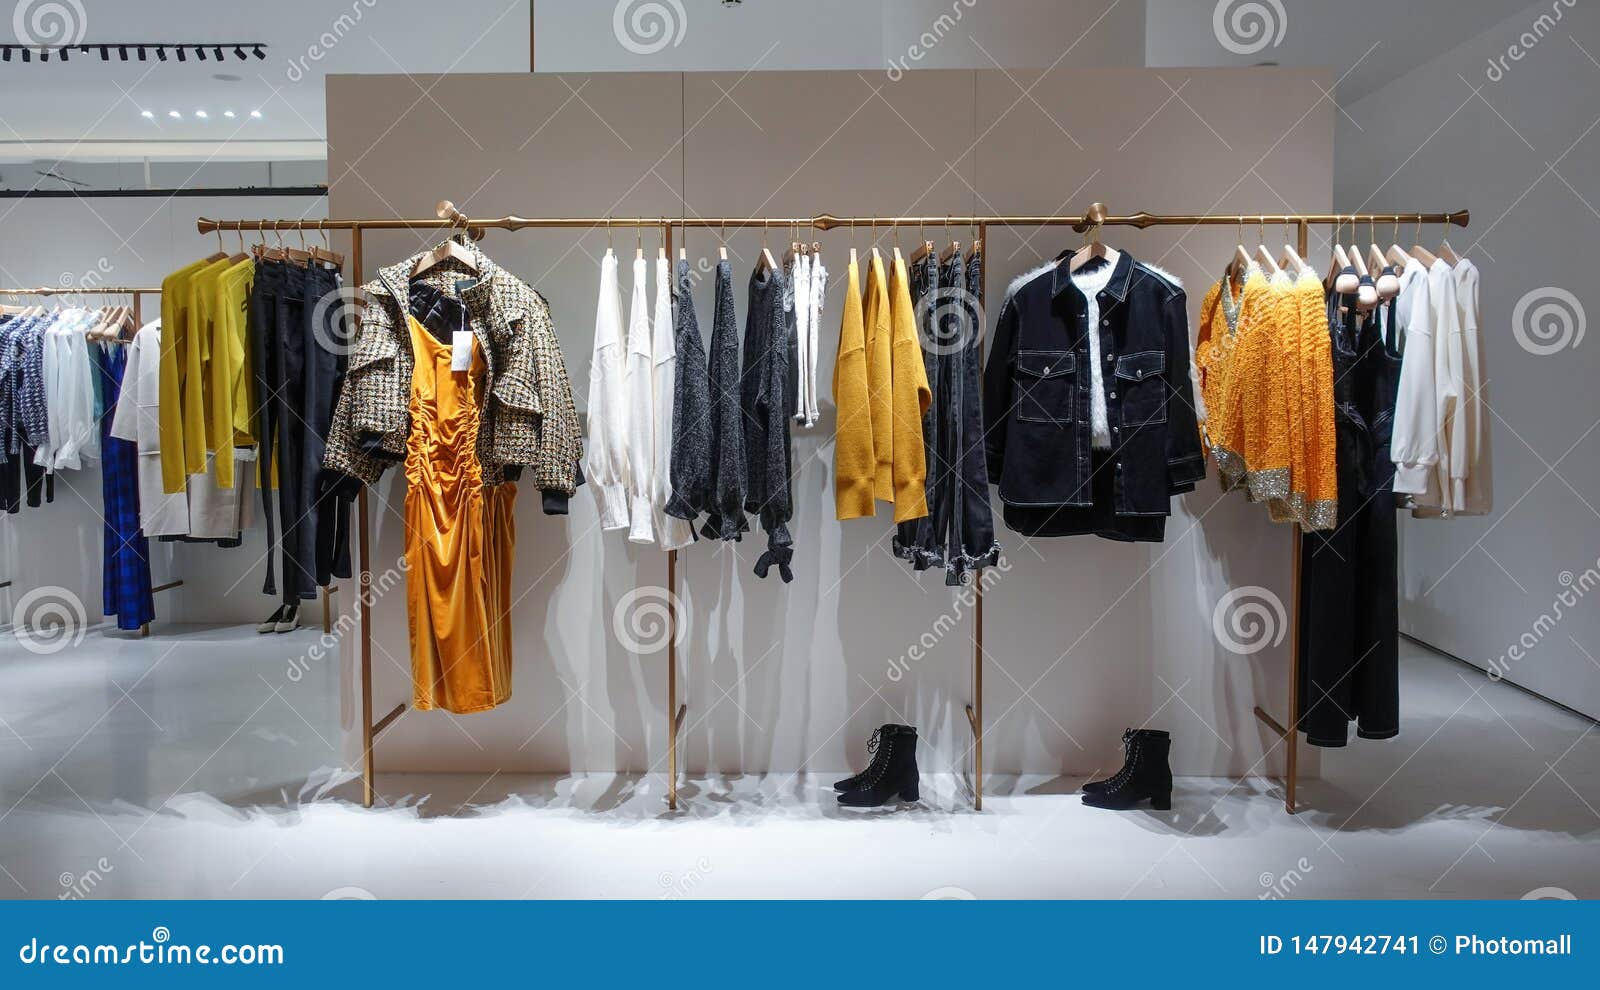 Lady Clothing Retail Shop in Shopping Mall Editorial Photo - Image of ...